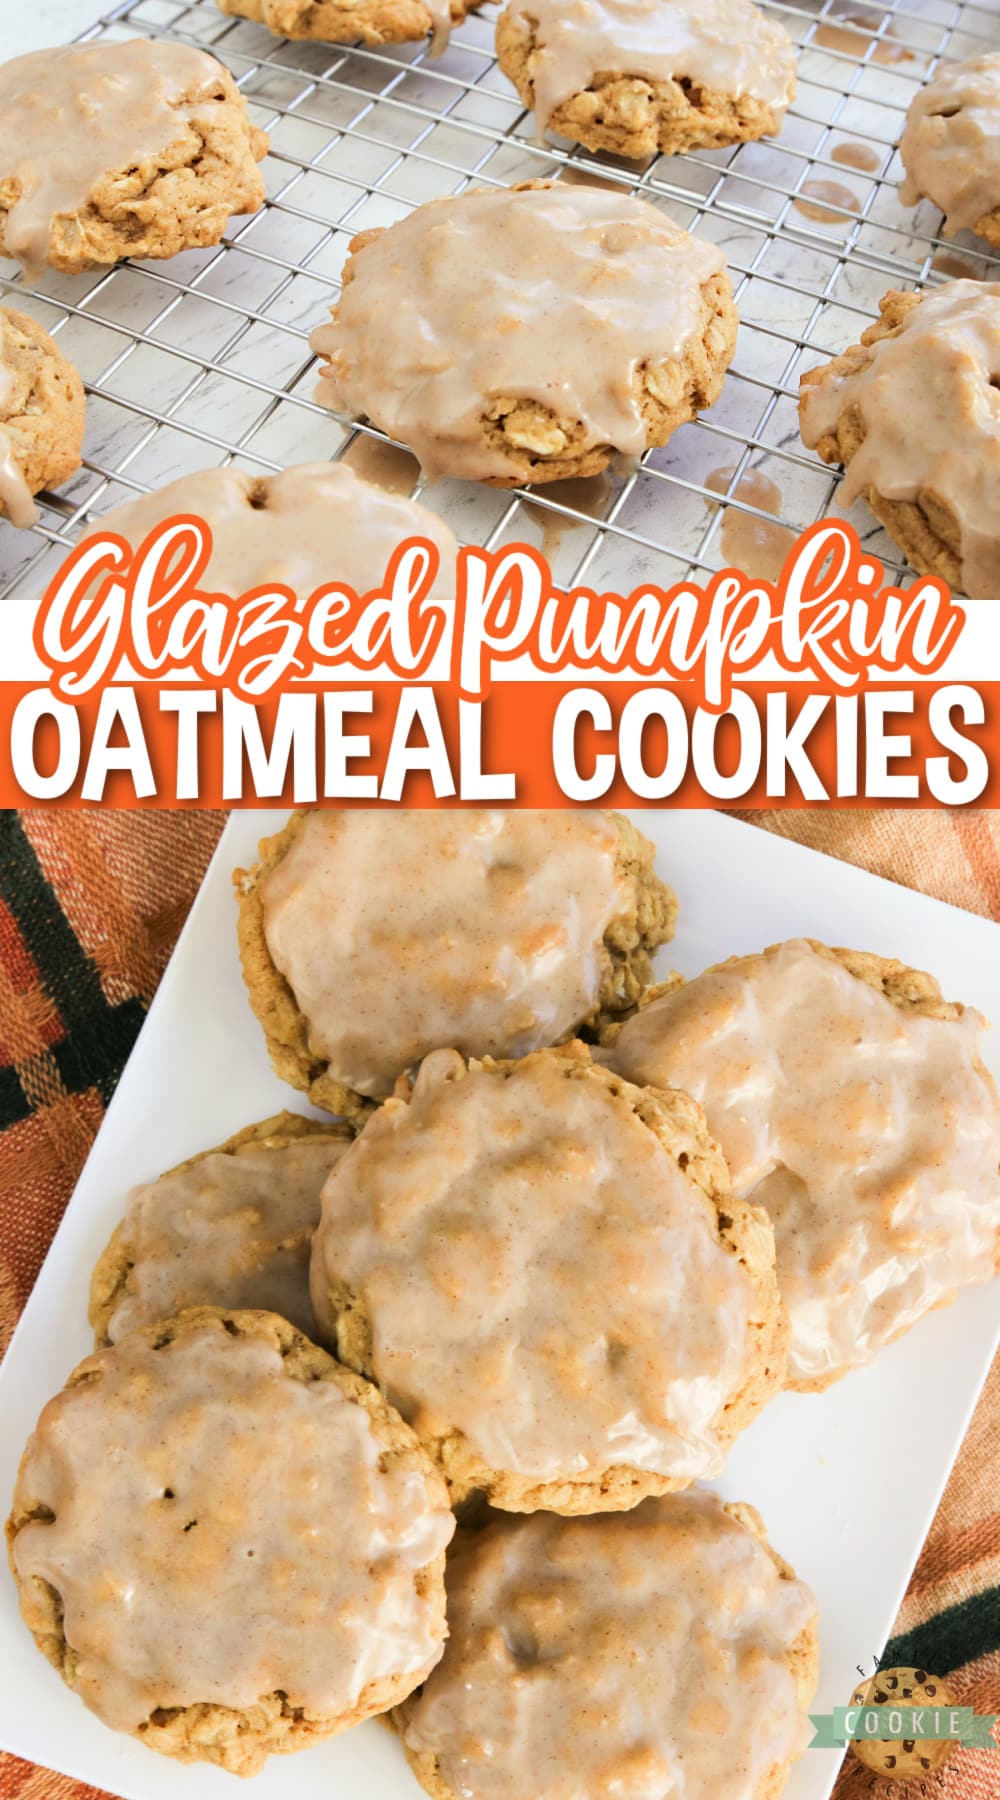 Glazed Pumpkin Oatmeal Cookies are soft, chewy oatmeal cookies packed with pumpkin and topped with a simple cinnamon sugar icing. The perfect cookie for fall!